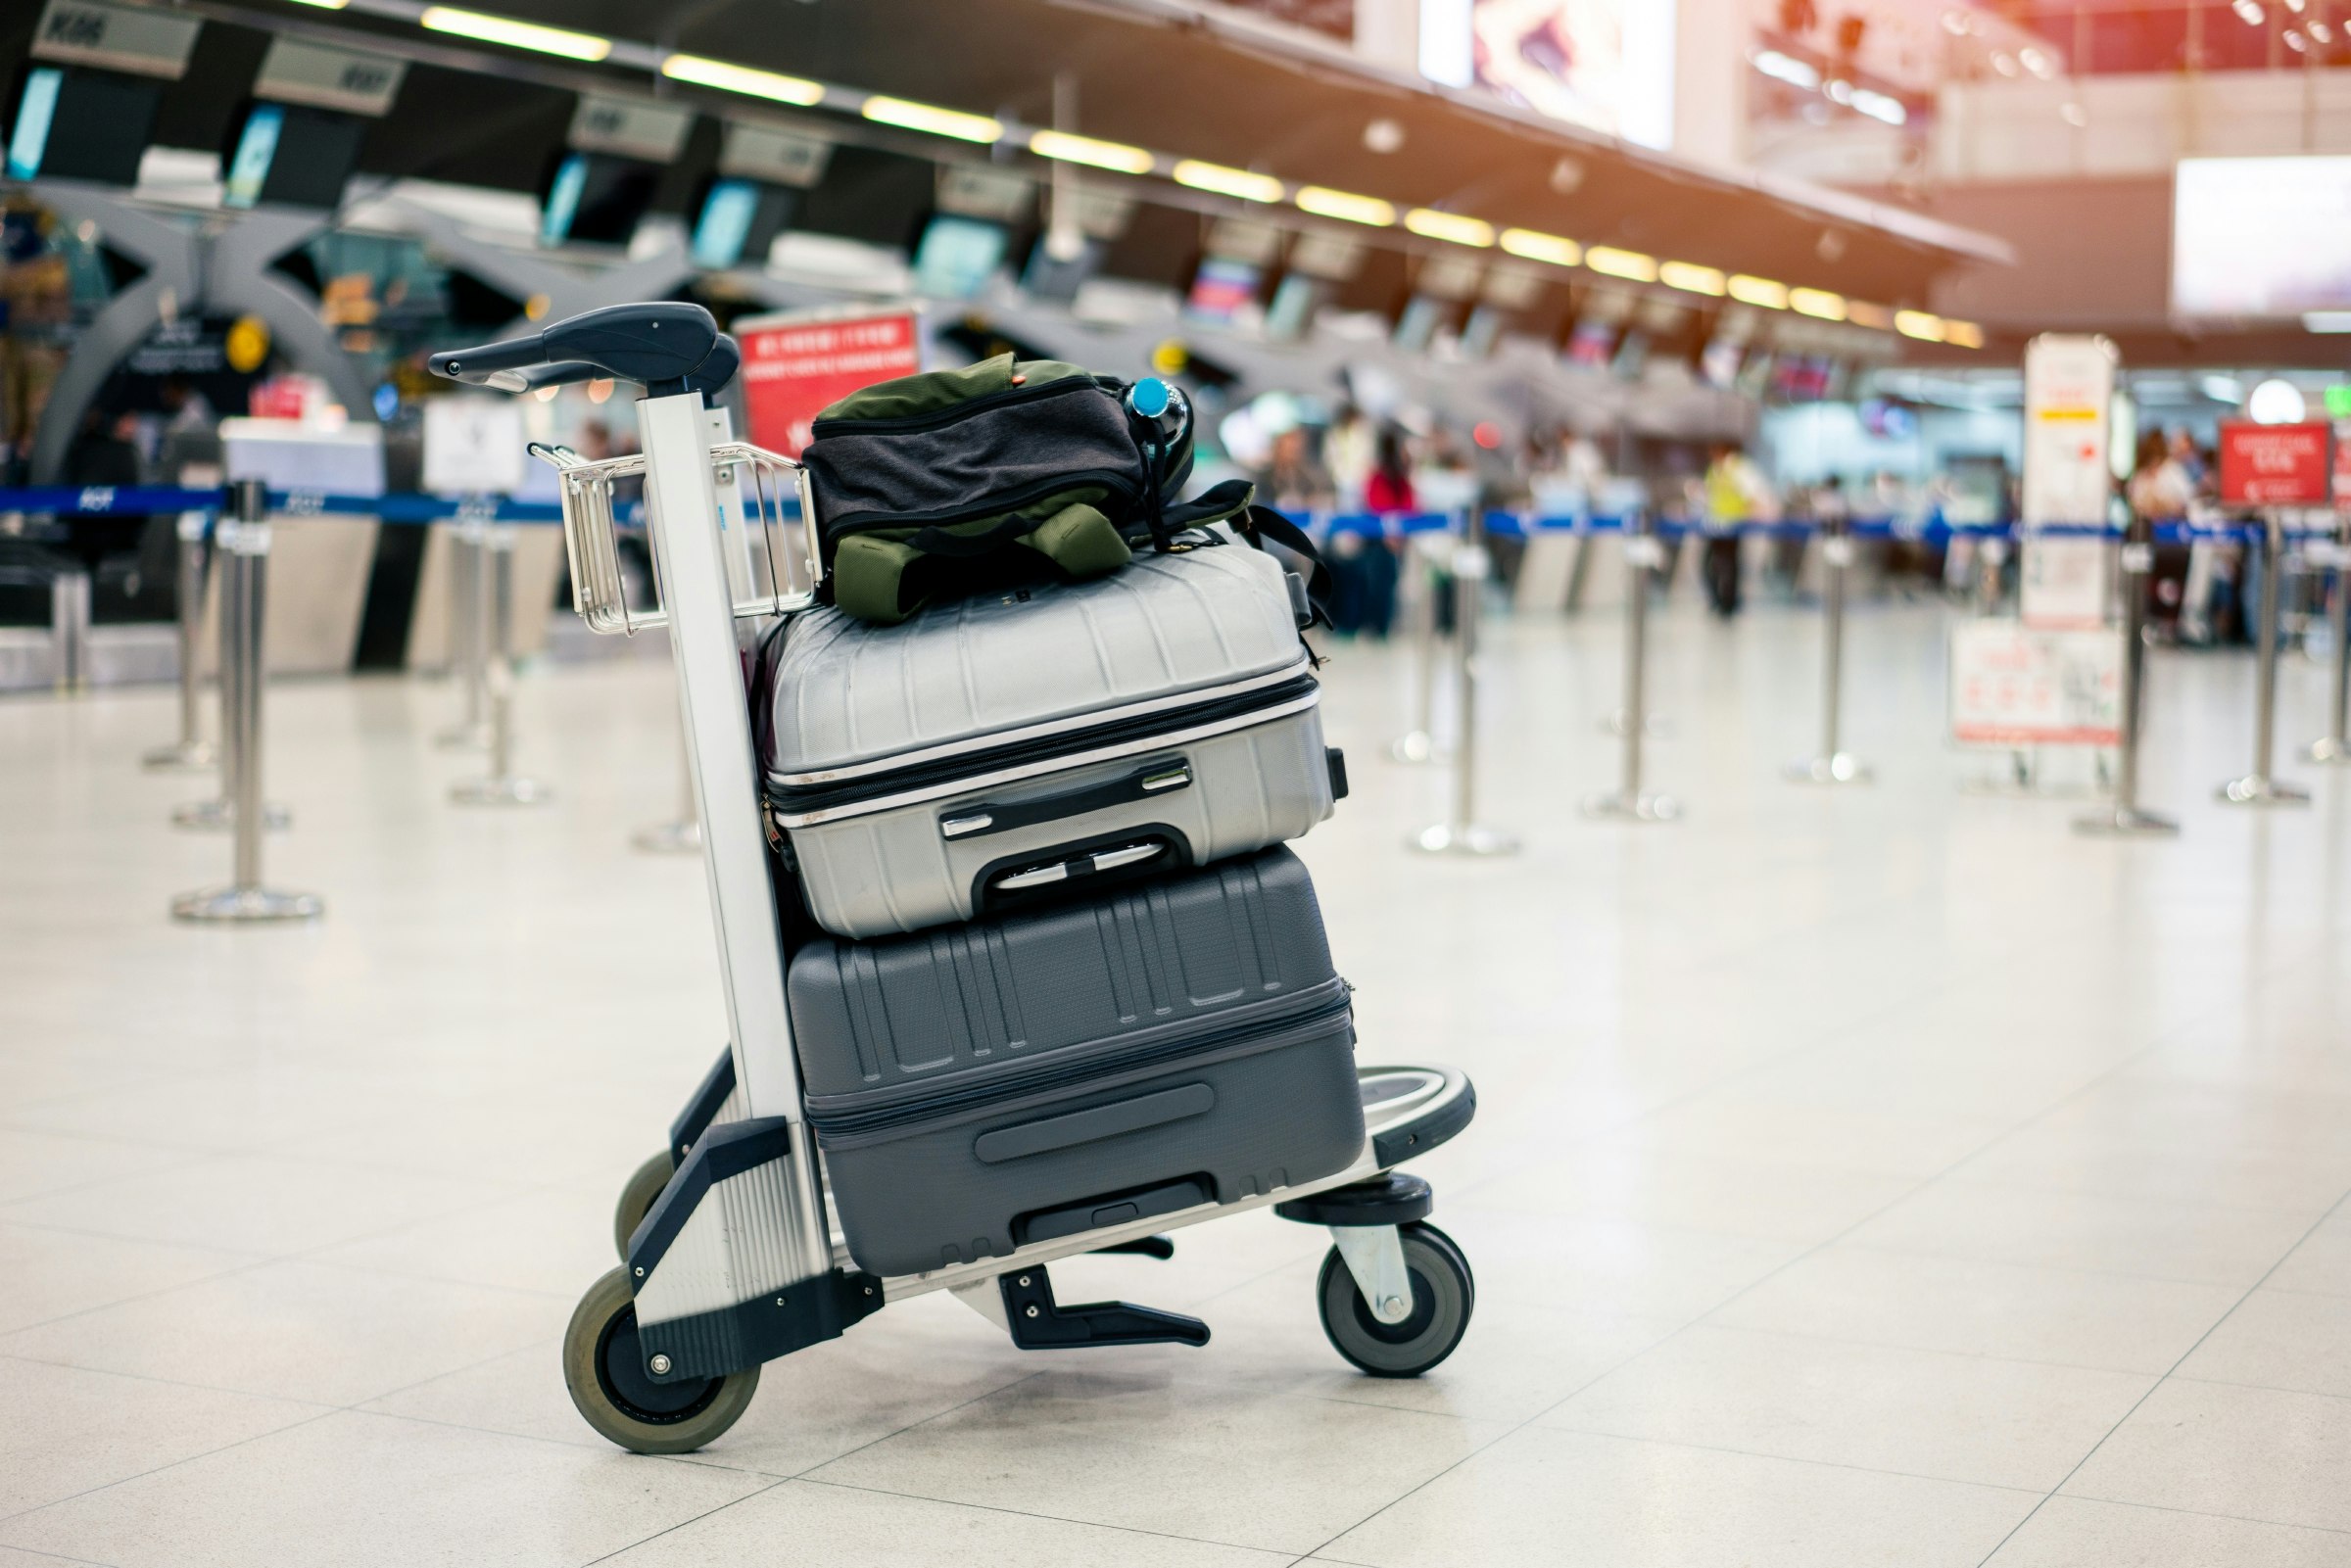 Suitcases stacked on a luggage trolley in an international airport.